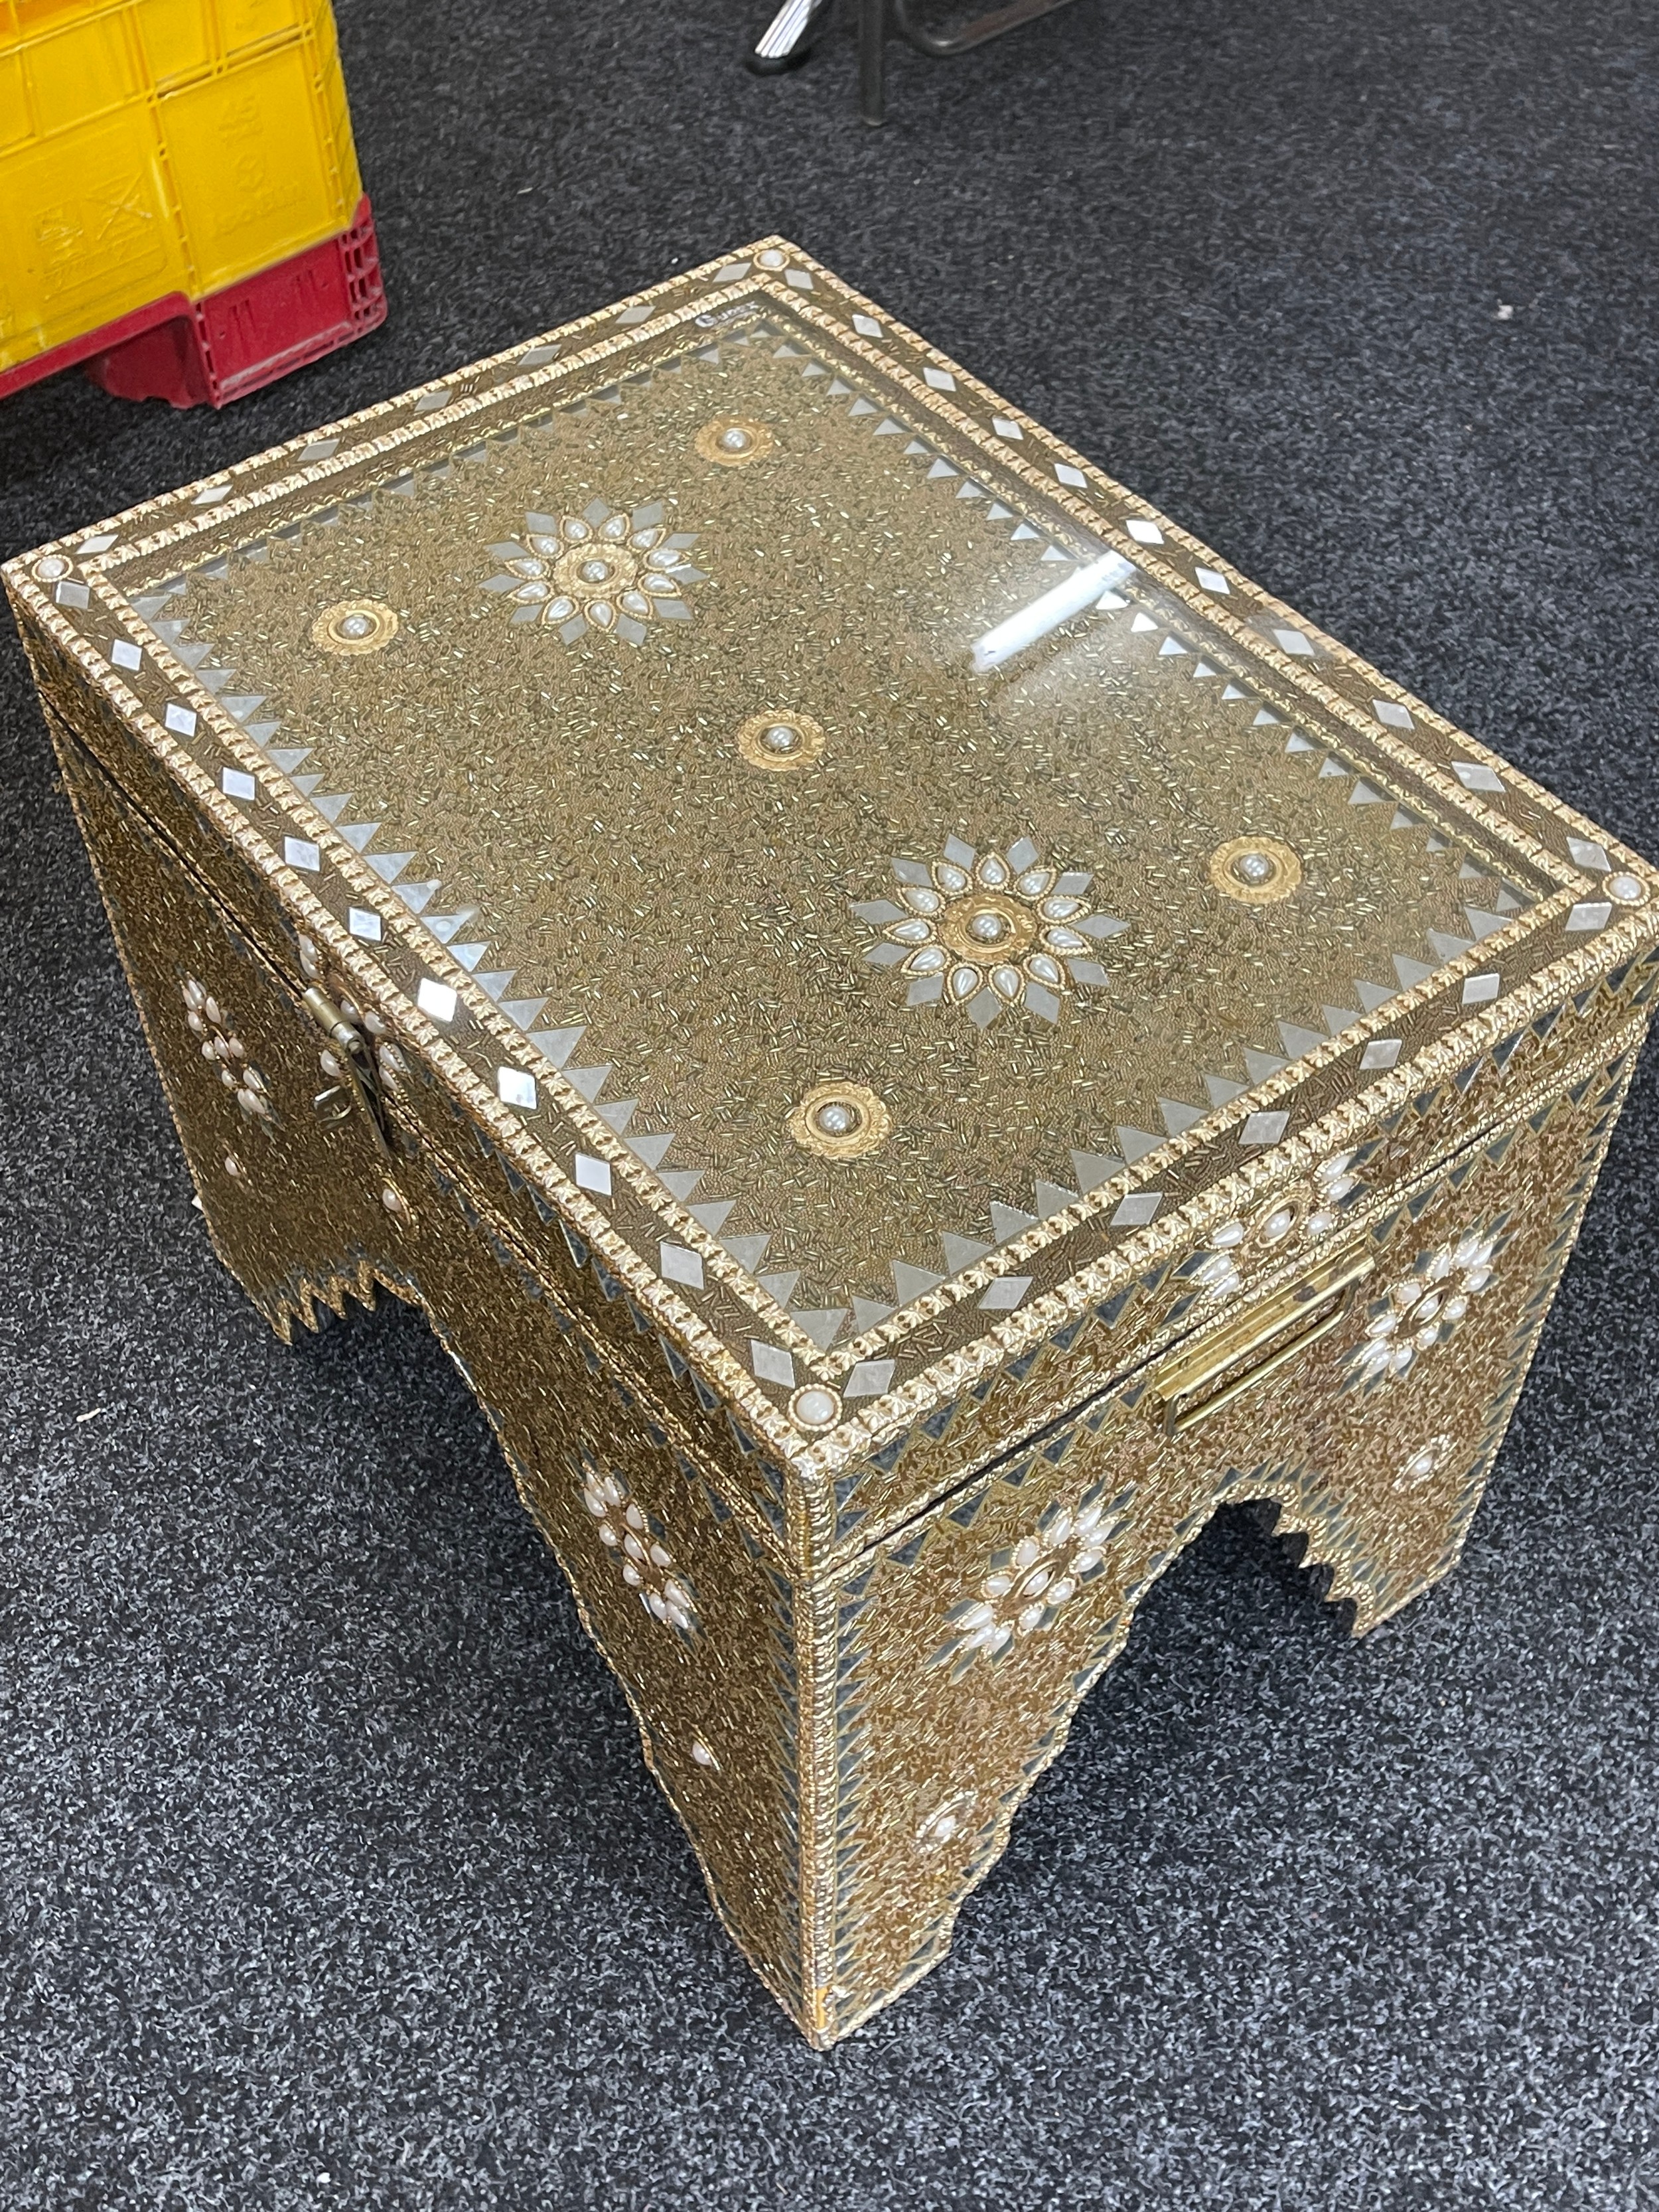 Indian style coffee table with lift up lid, Height 19 inches, Width 22 inches, Depth 16 inches - Image 4 of 6